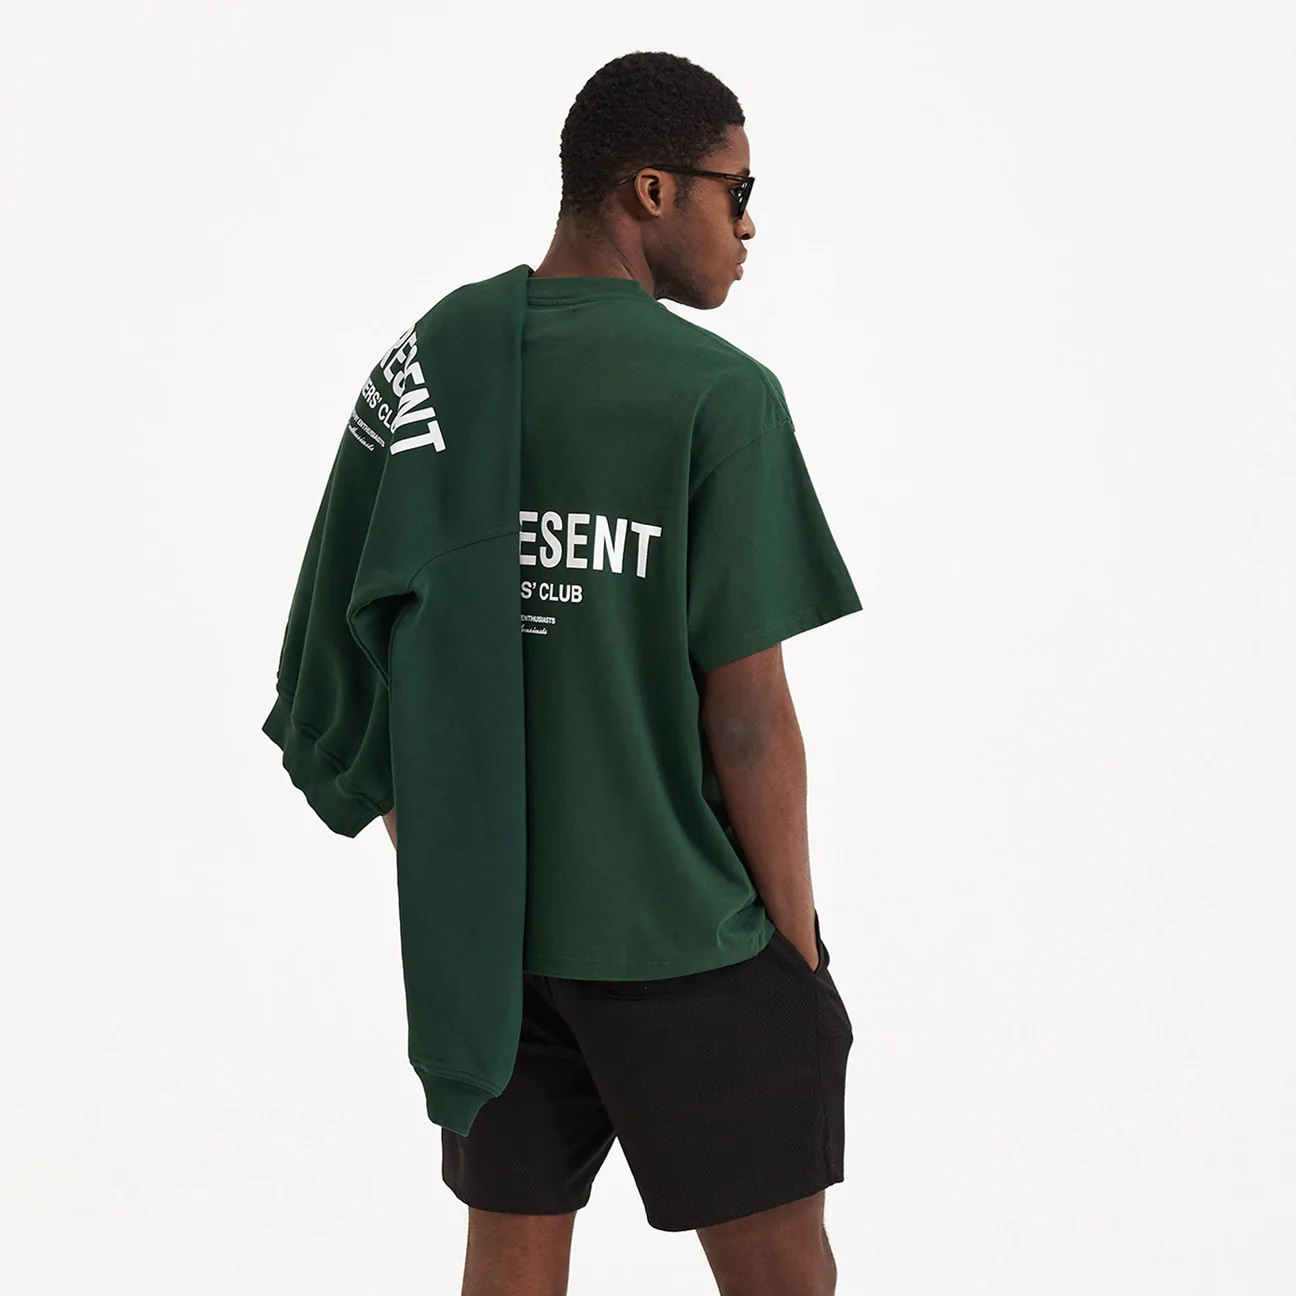 Represent Owners Club T-Shirt in Racing Green S